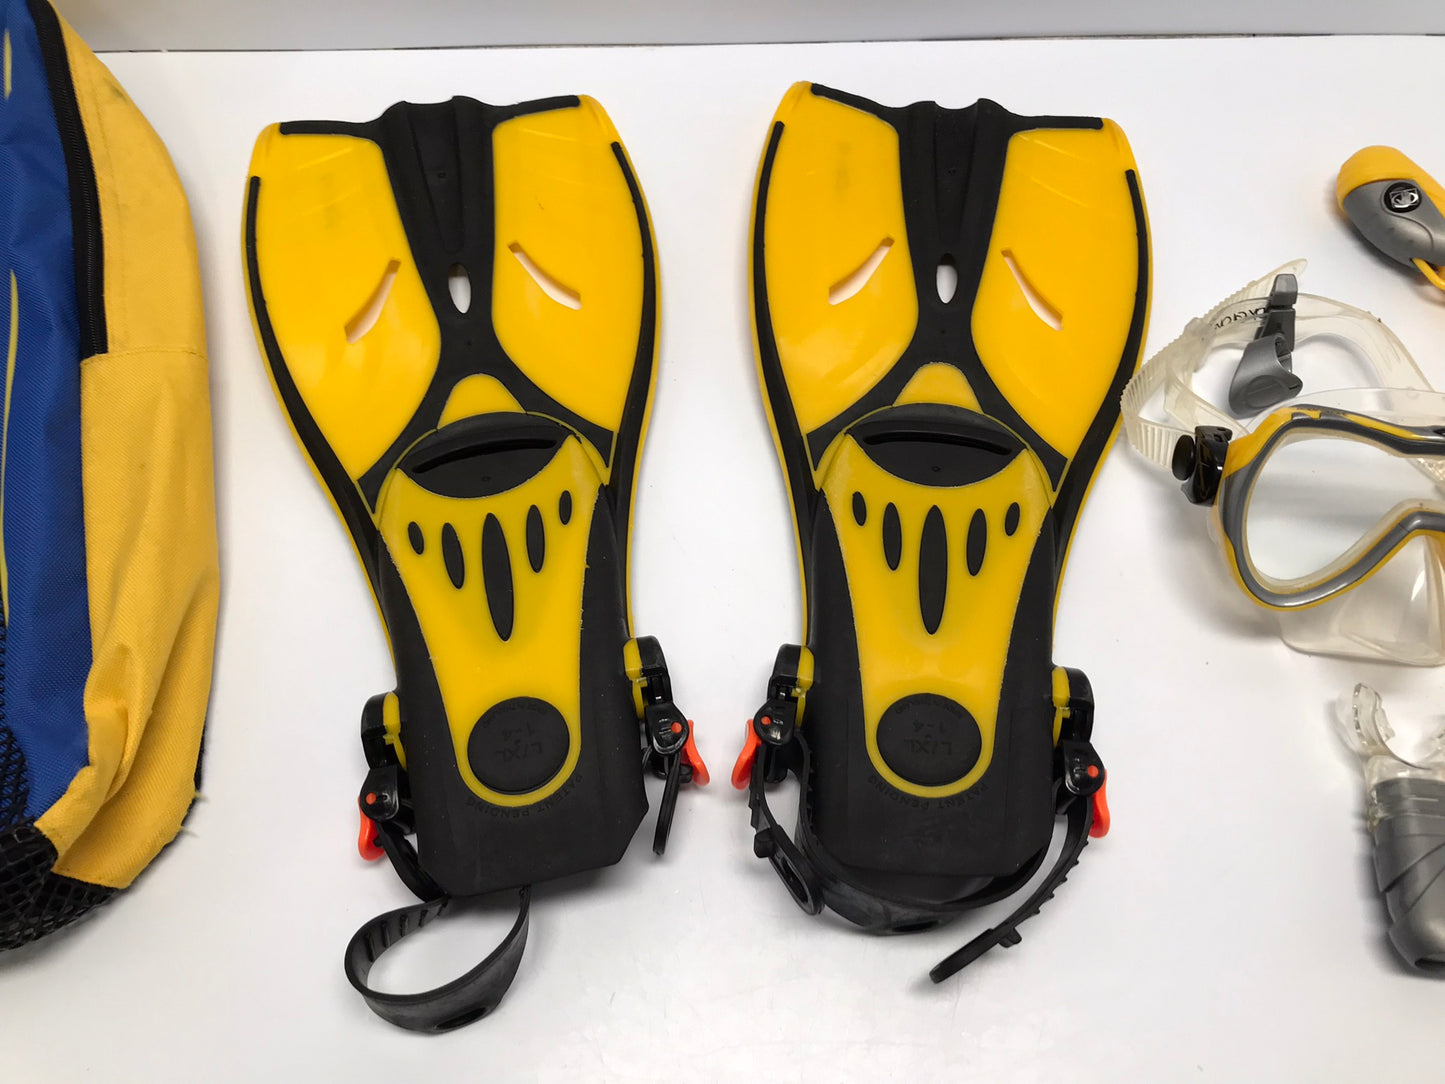 Snorkel Set Youth Shoe Size 1-4 Body Glove Black Yellow Excellent